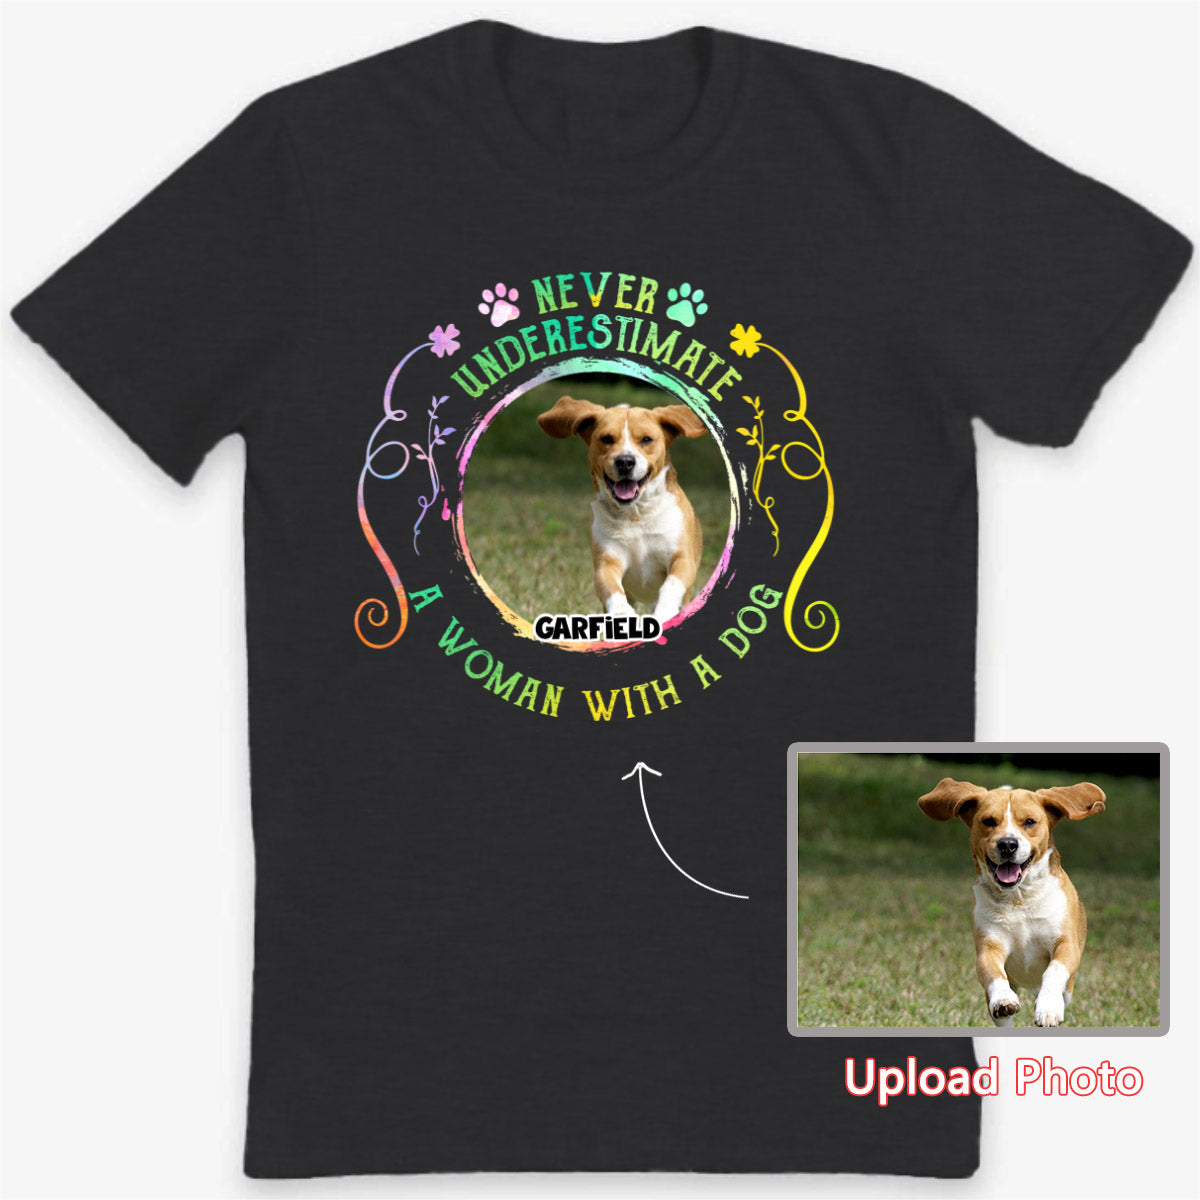 A Woman With A Dog Personalized Shirt